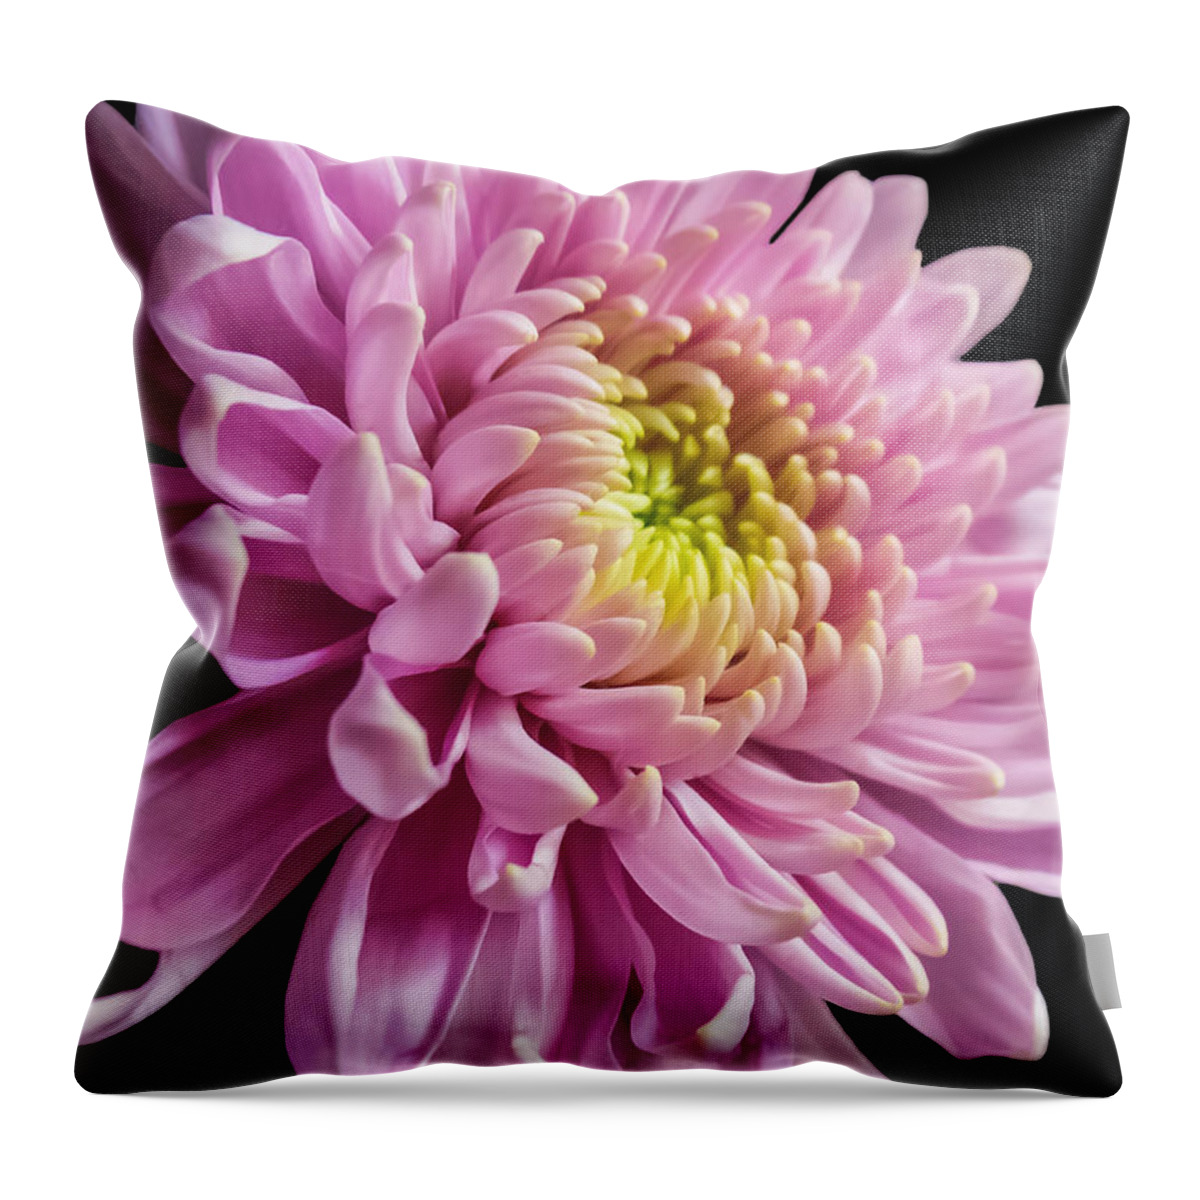 Pink Dahlia Throw Pillow featuring the photograph The One And Only Dahlia by Charlie Cliques